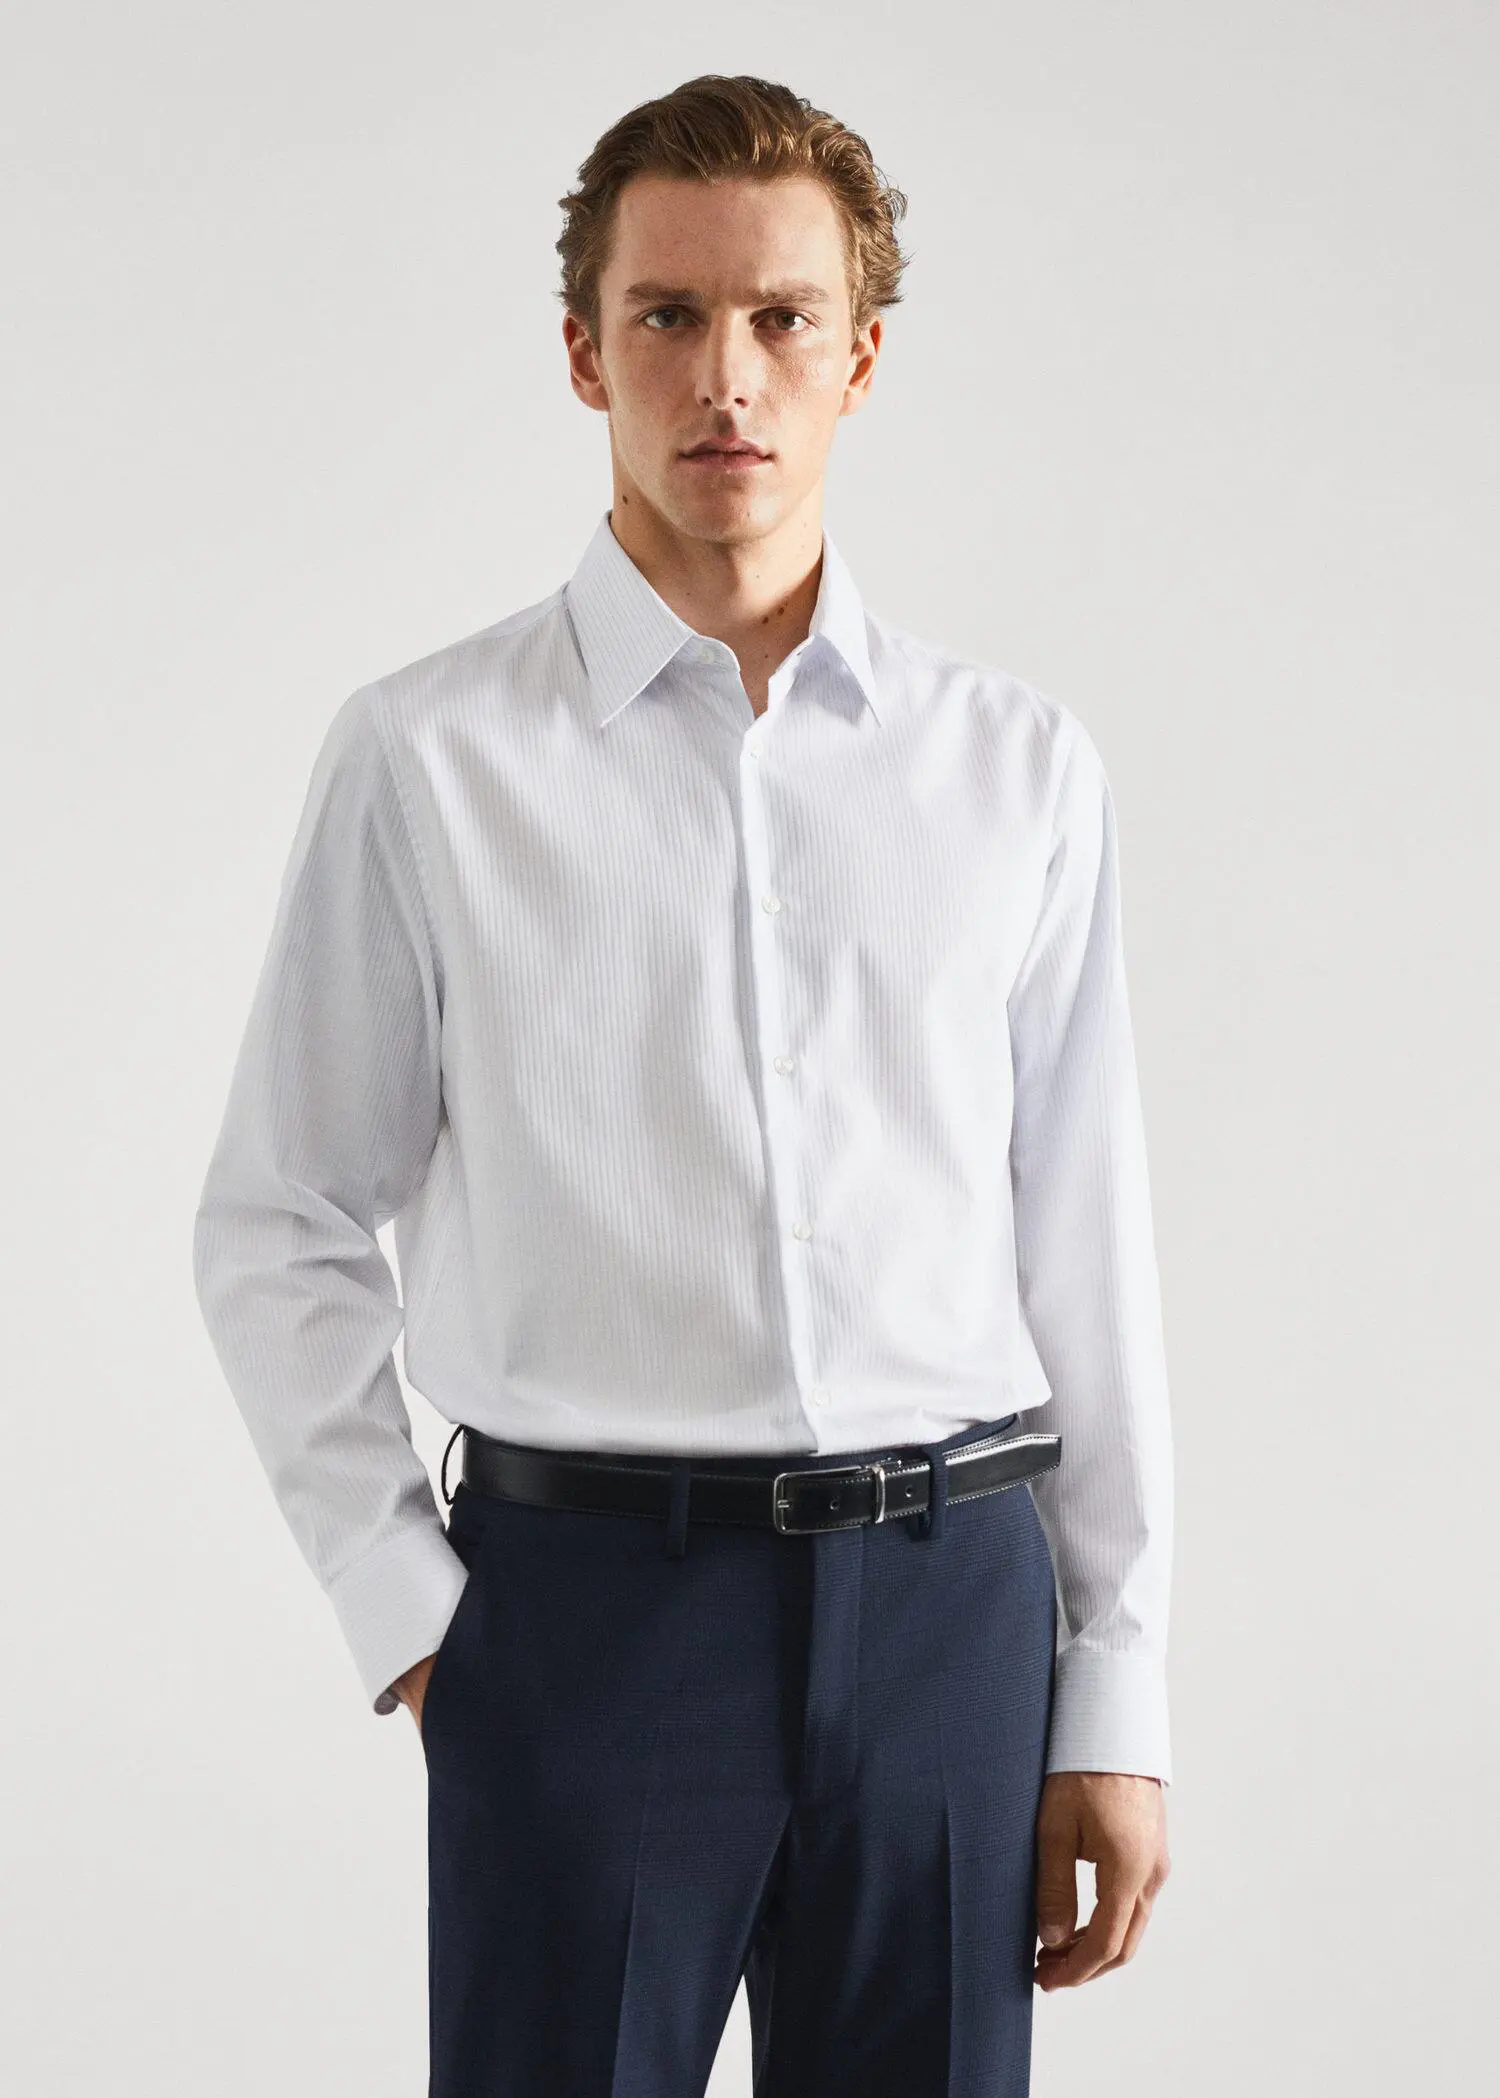 Mango Slim-fit striped cotton twill suit shirt. a man in a white shirt and black belt. 